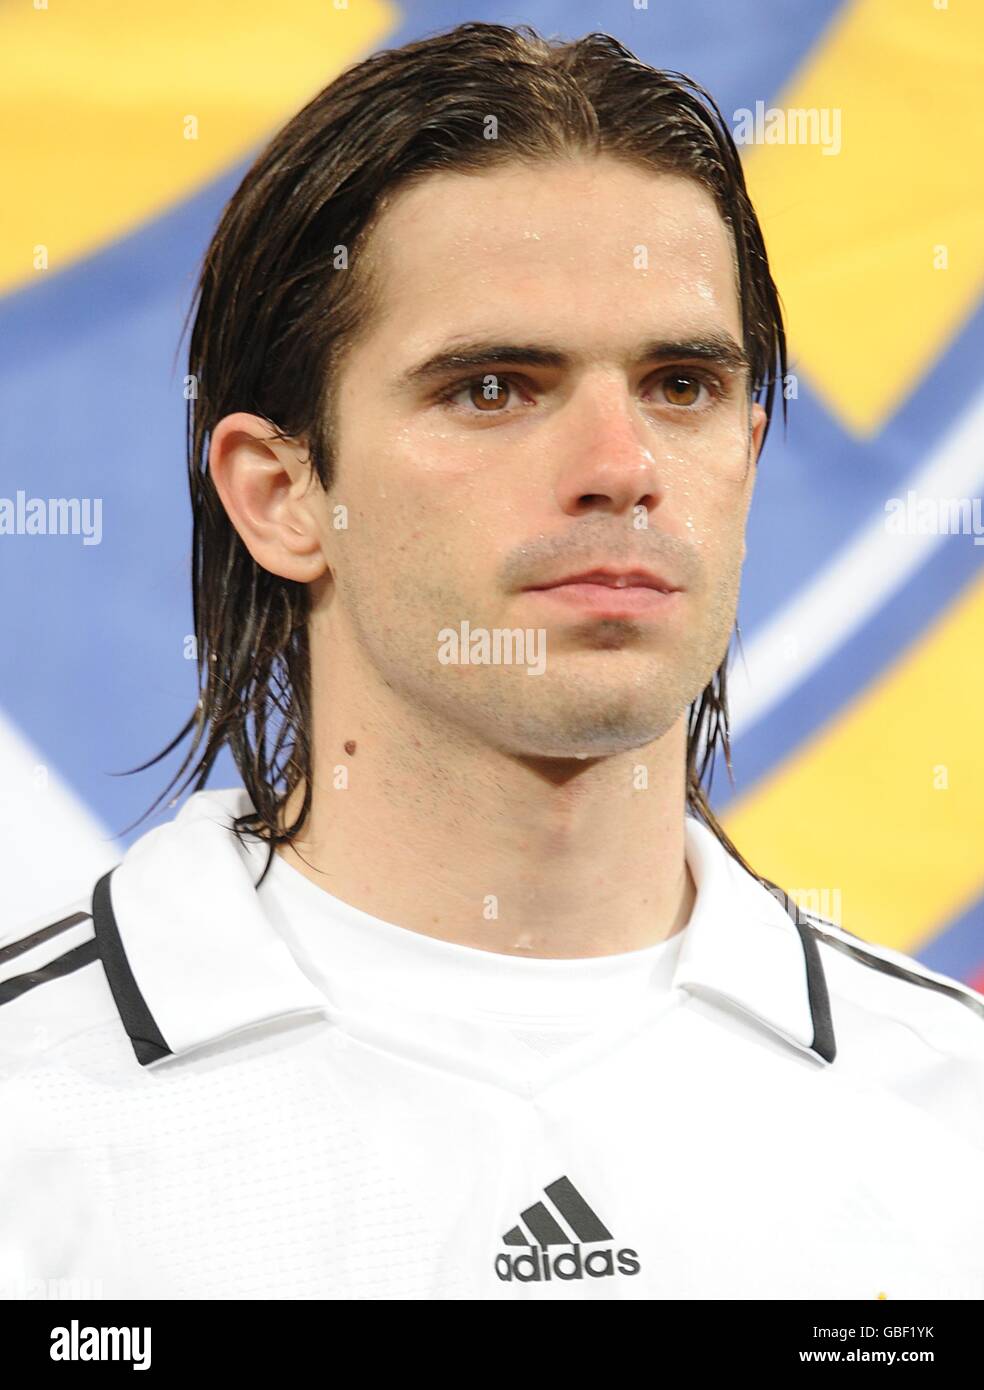 Soccer - UEFA Champions League - First Knockout Round - First Leg - Real Madrid v Liverpool - Santiago Bernabeu. Fernando Gago, Real Madrid. Stock Photo